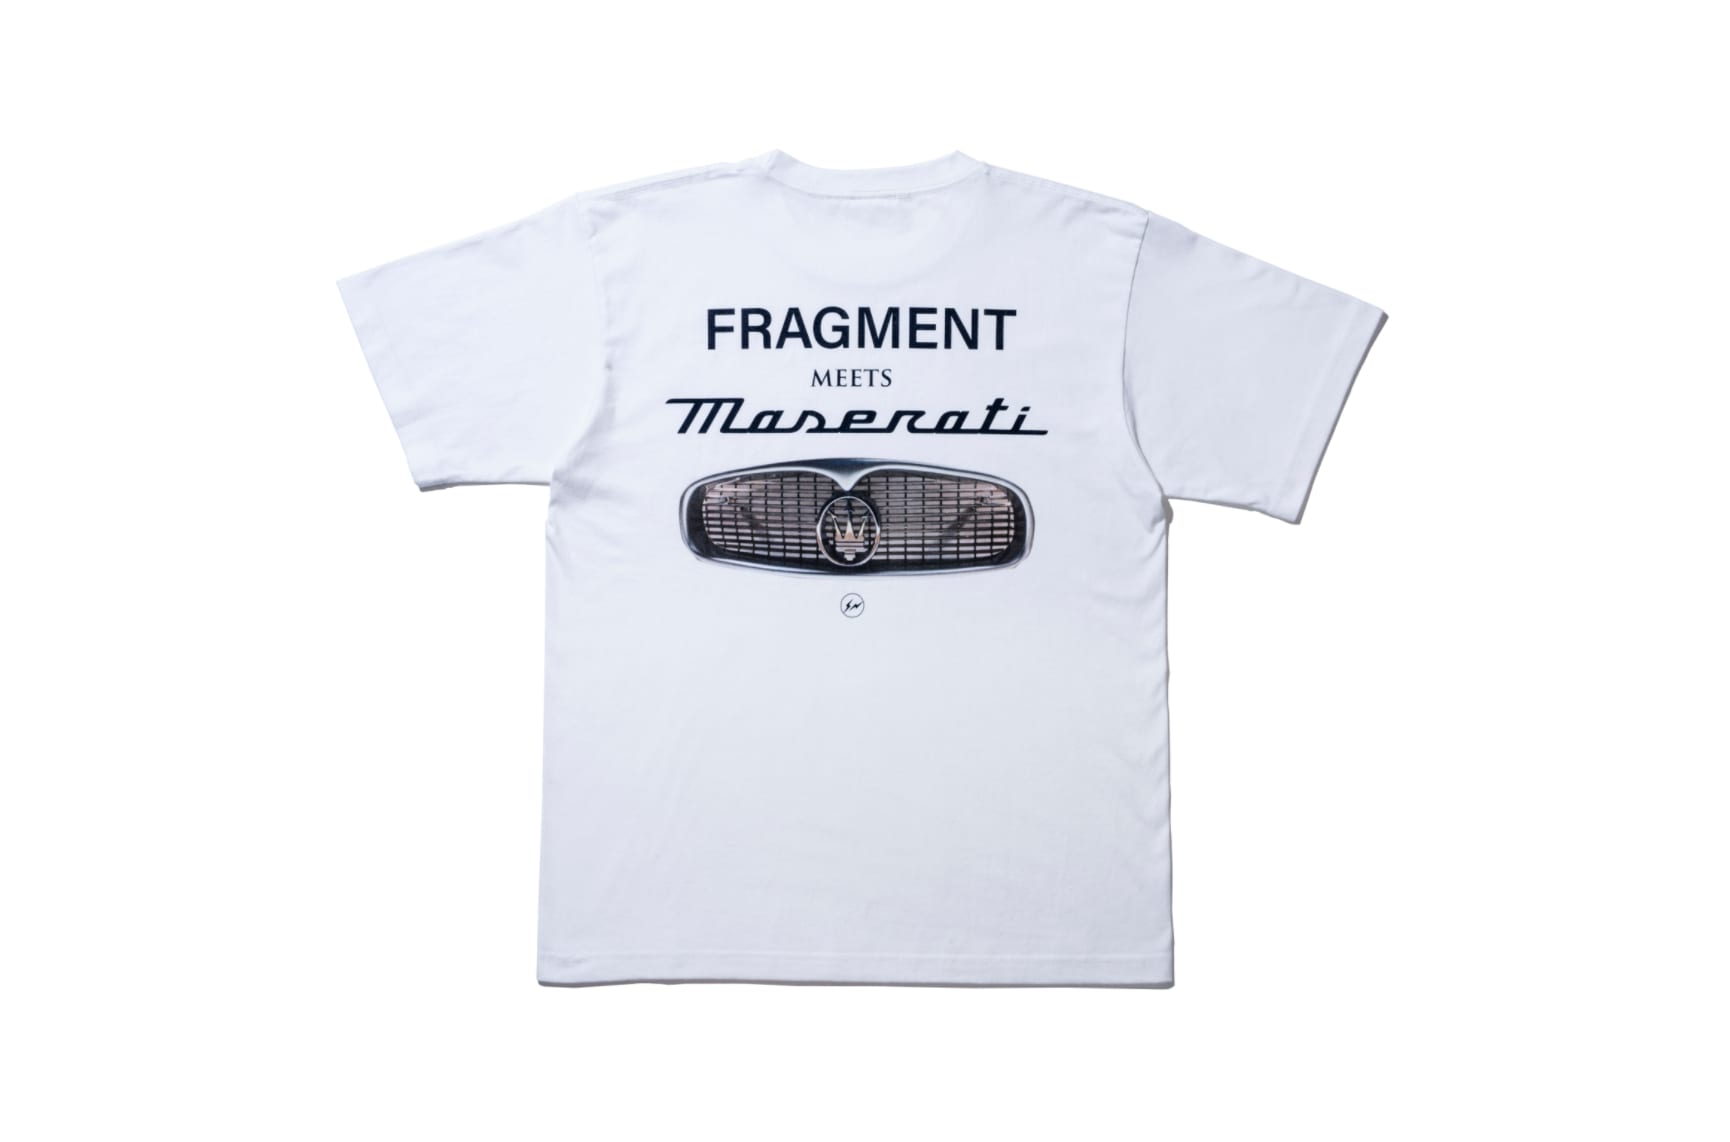 A Fragment t-shirt is shown.